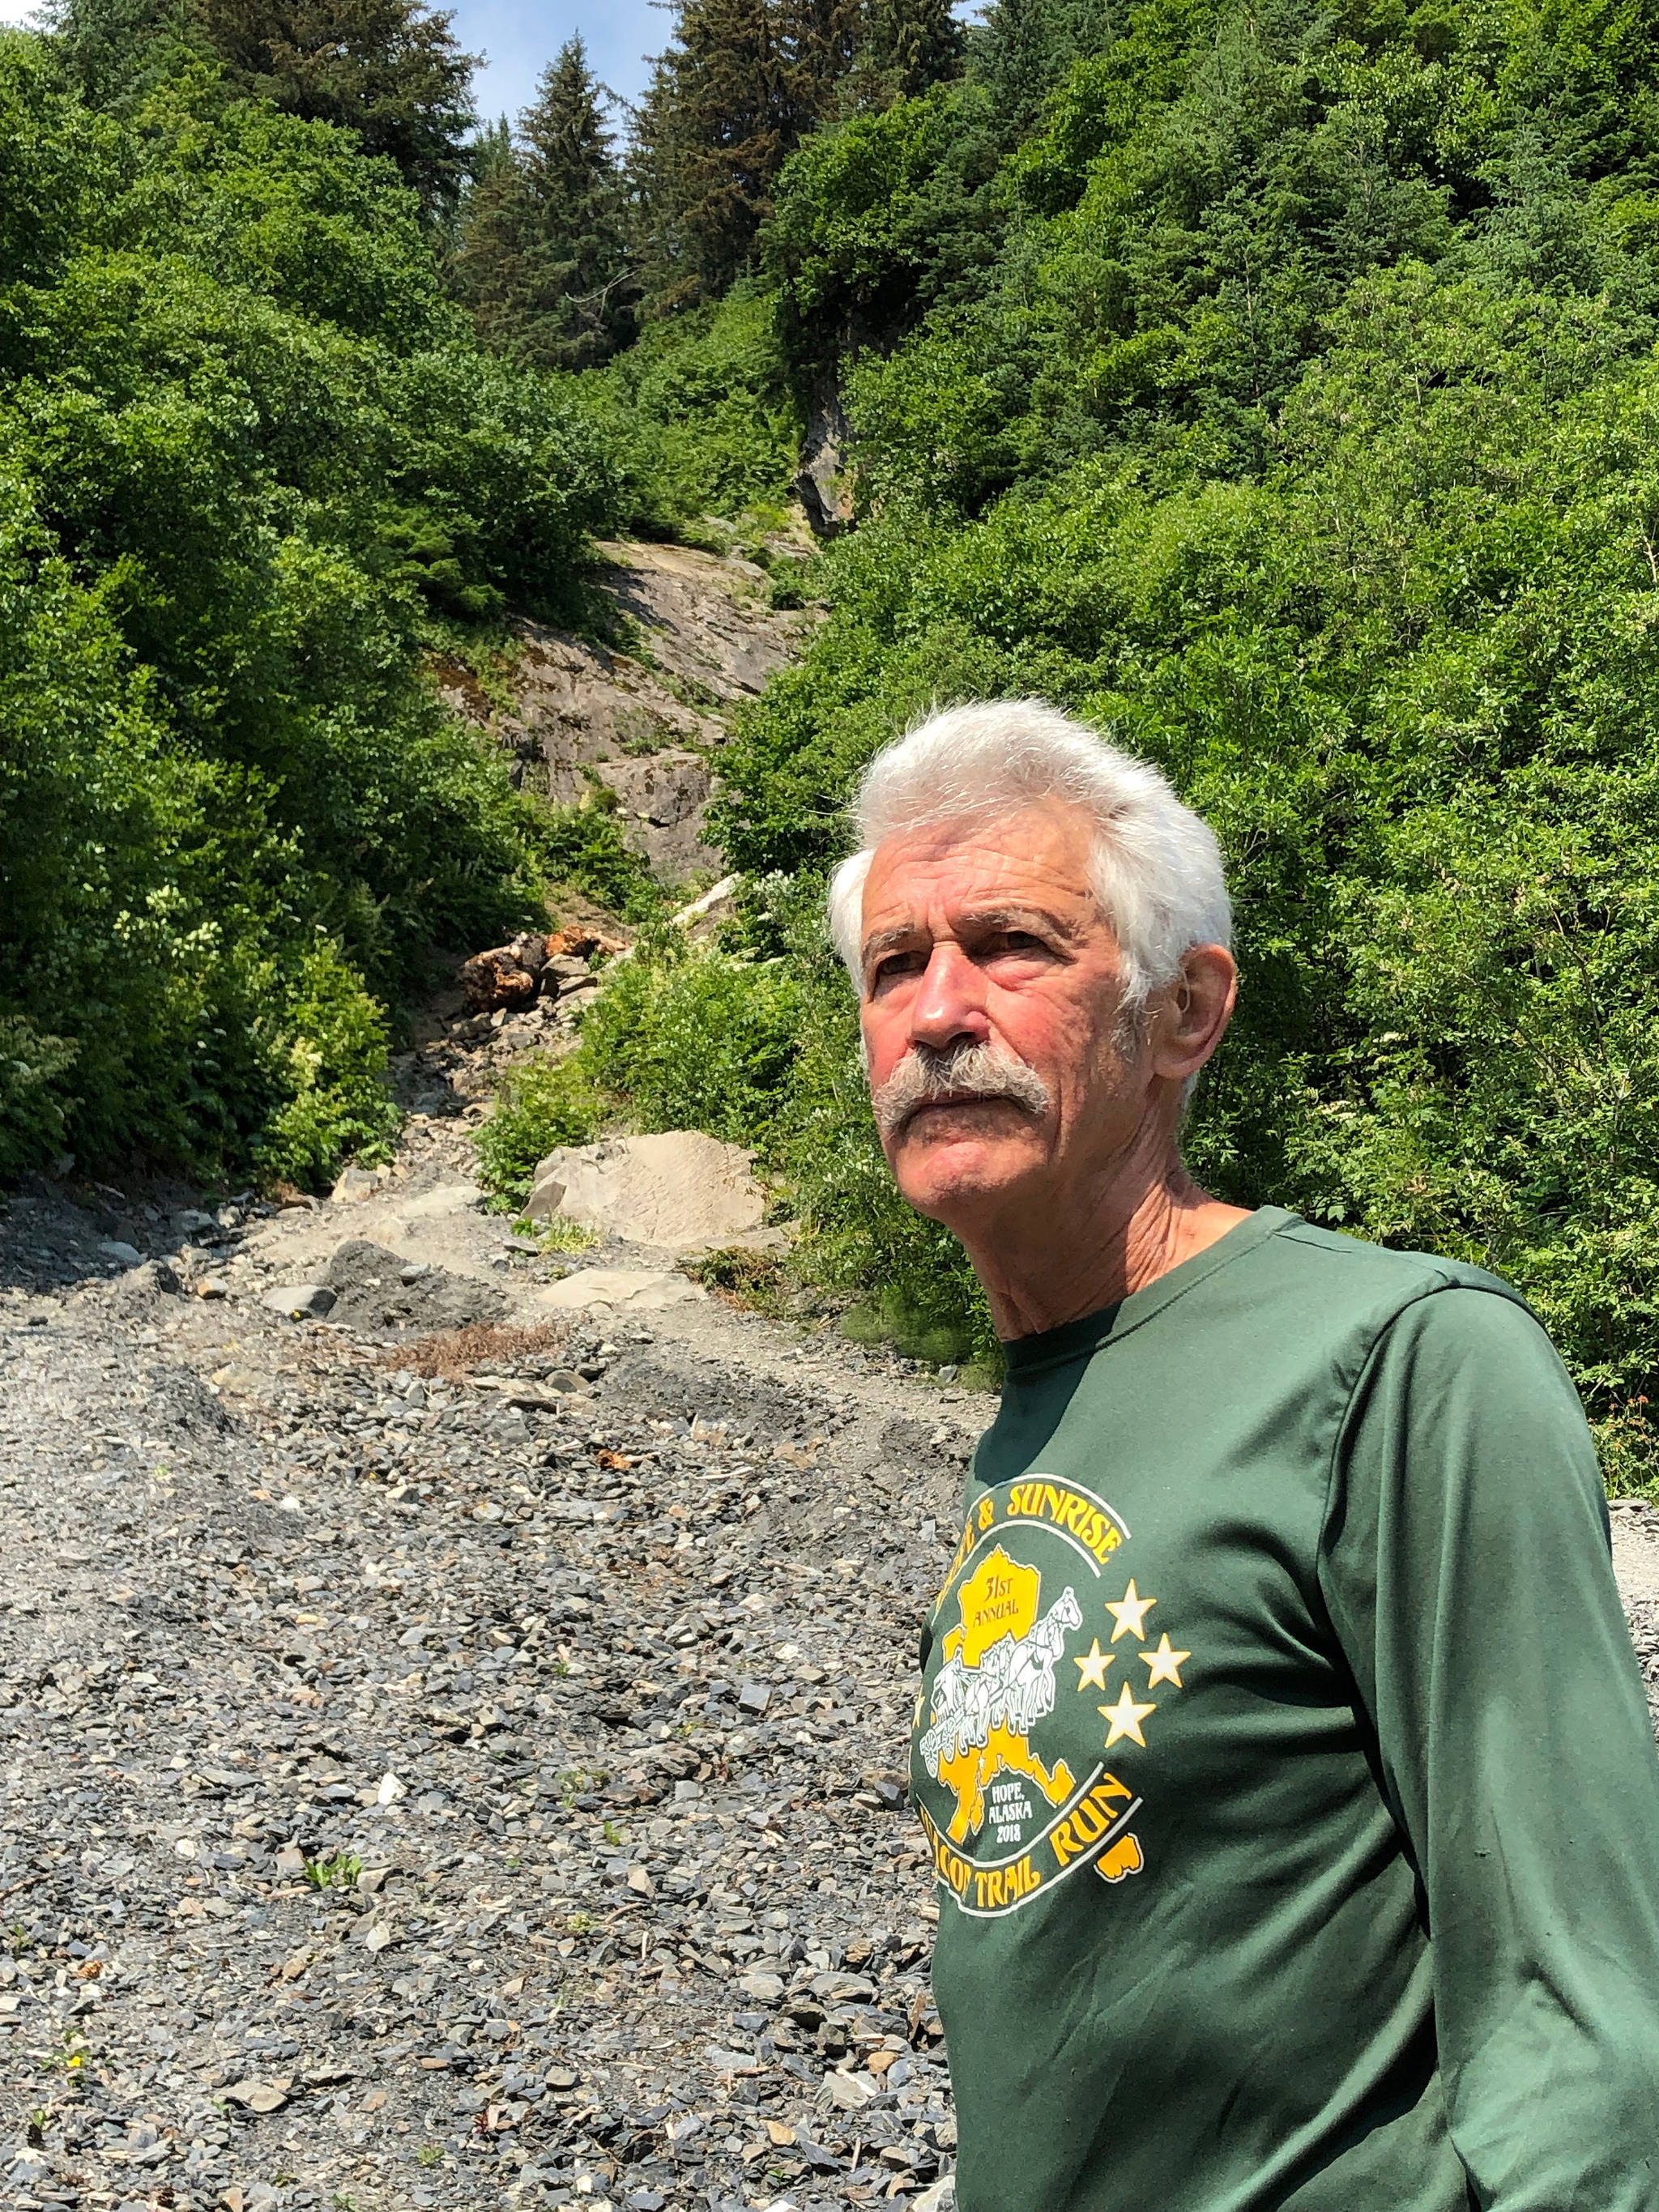 Seward’s Fred Moore stands at the base of Mount Marathon in Seward, Alaska, on Monday, June 24. Moore will run in his 50th consecutive Mount Marathon race on July 4. (Photo by Joey Klecka/Peninsula Clarion)